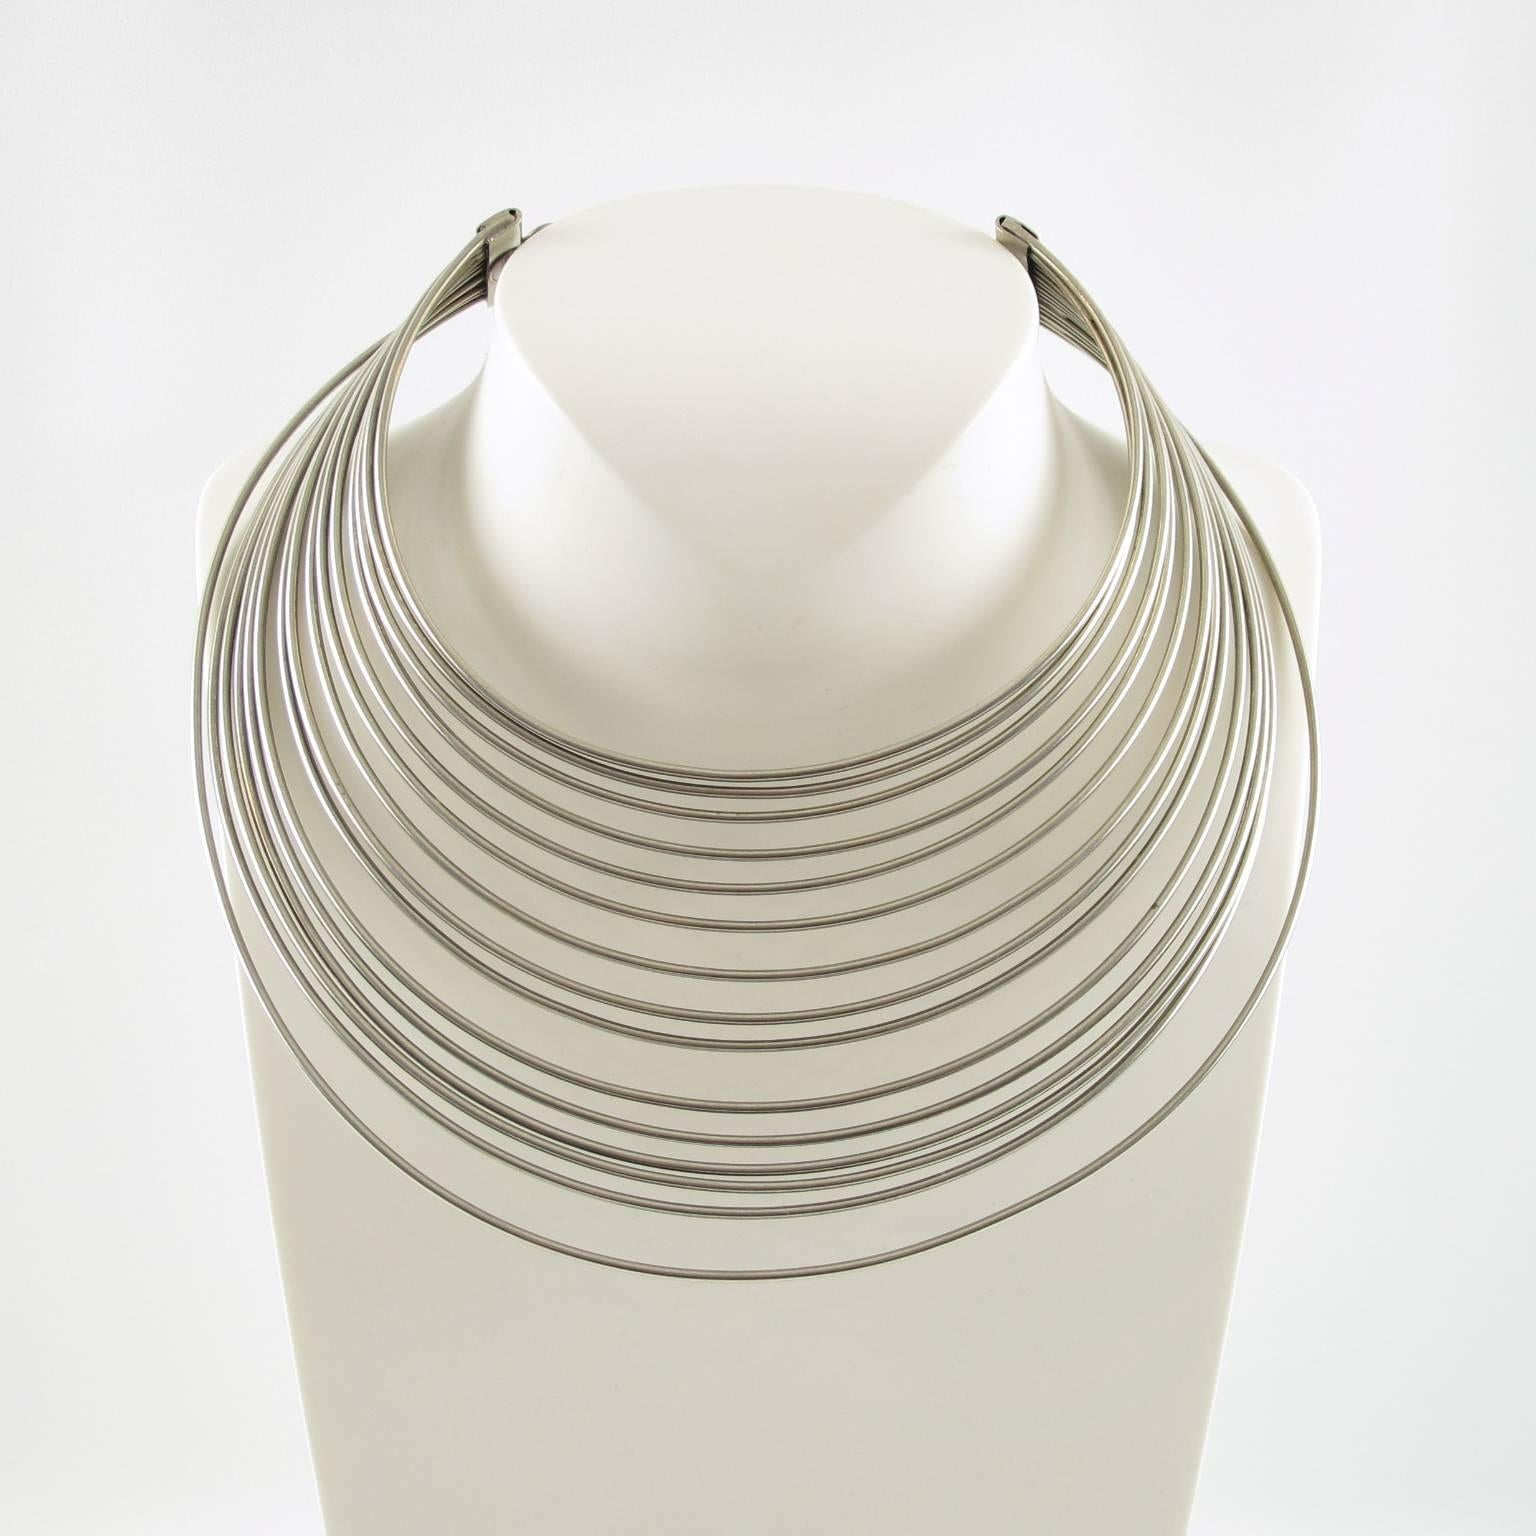 Rare silvered metal collar necklace by French couture designer Jean Paul Gaultier. Very interesting rigid multi-strand design from the 1997 Masai collection inspired by African popular jewelry. Marked 'Gaultier' at the back. Link chain gives